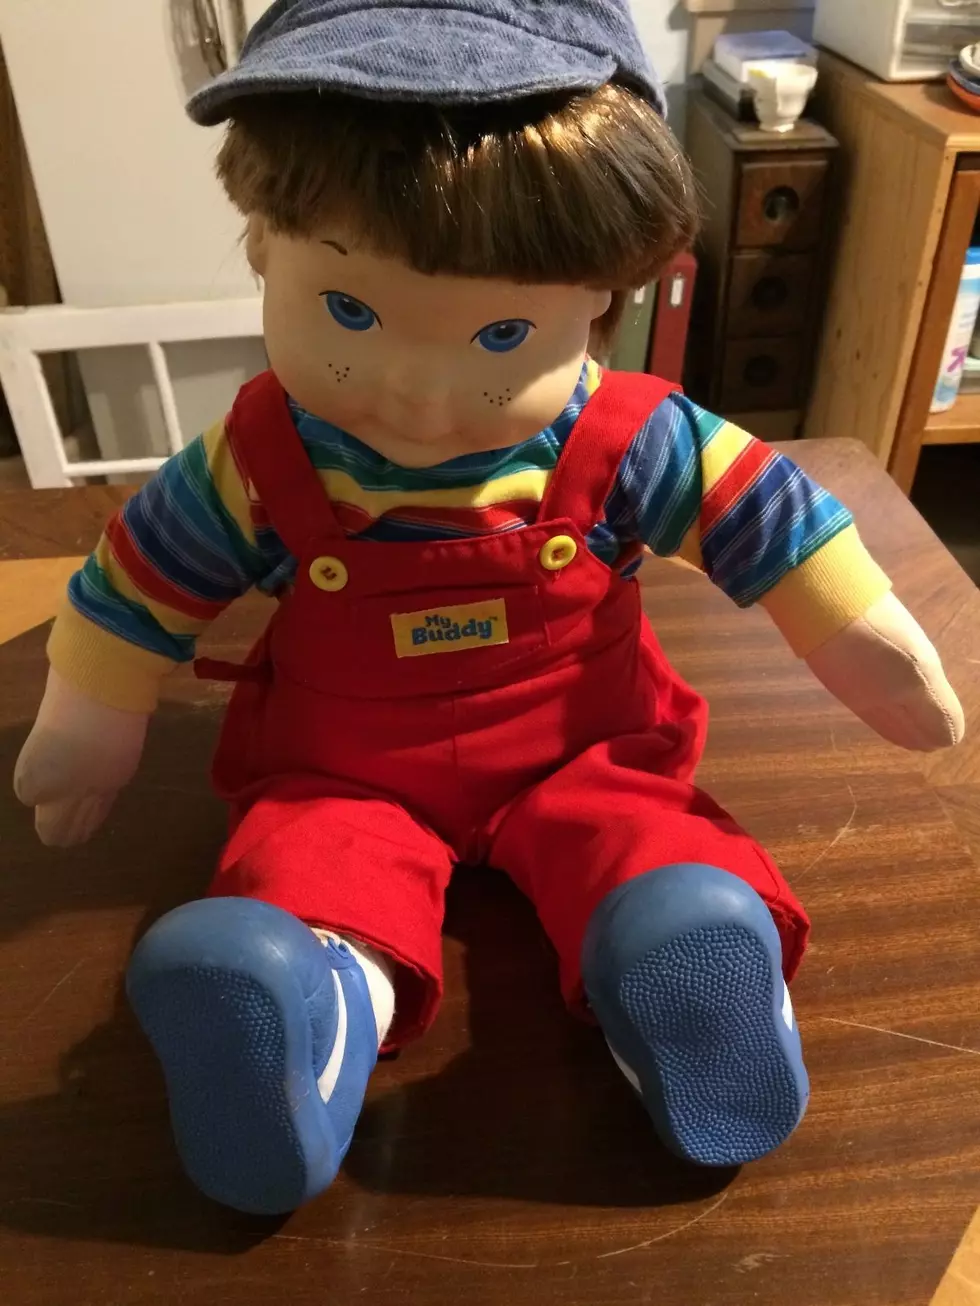 ‘My Buddy’ Doll, Commercial Song Still Haunt Me